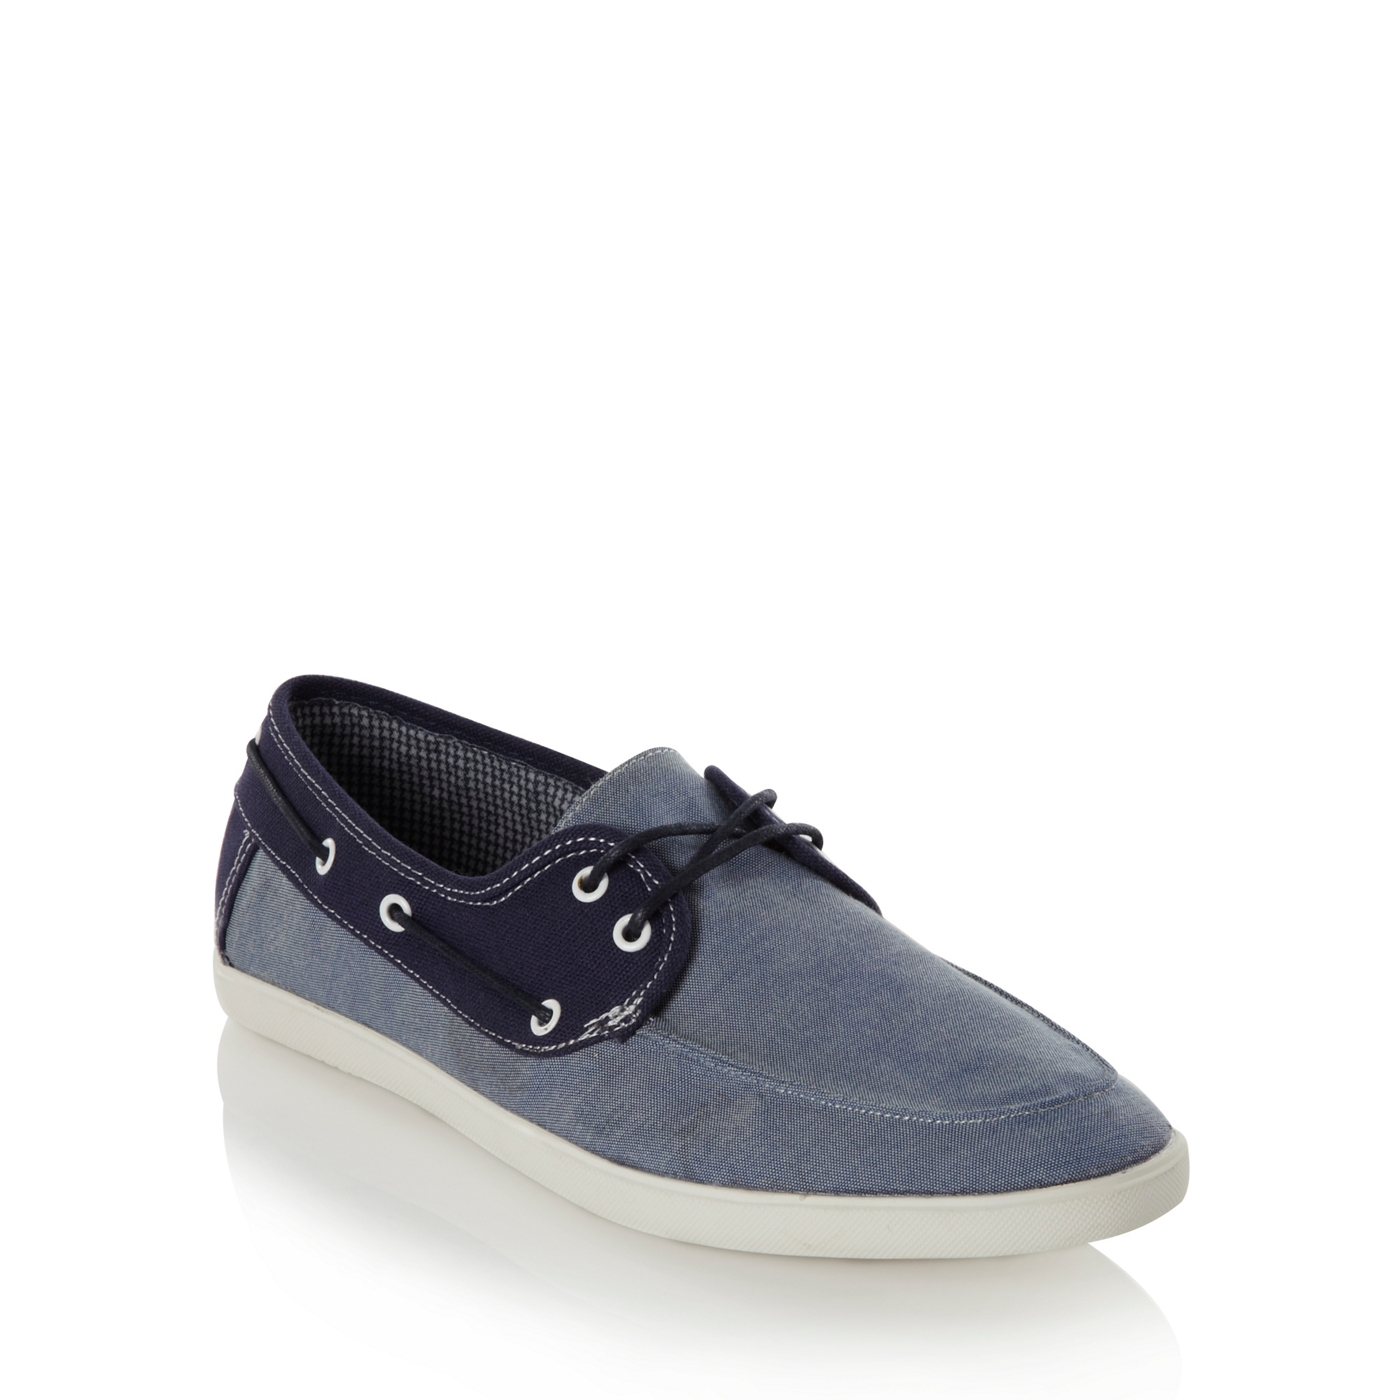 Call It Spring Blue chambray denim boat shoes